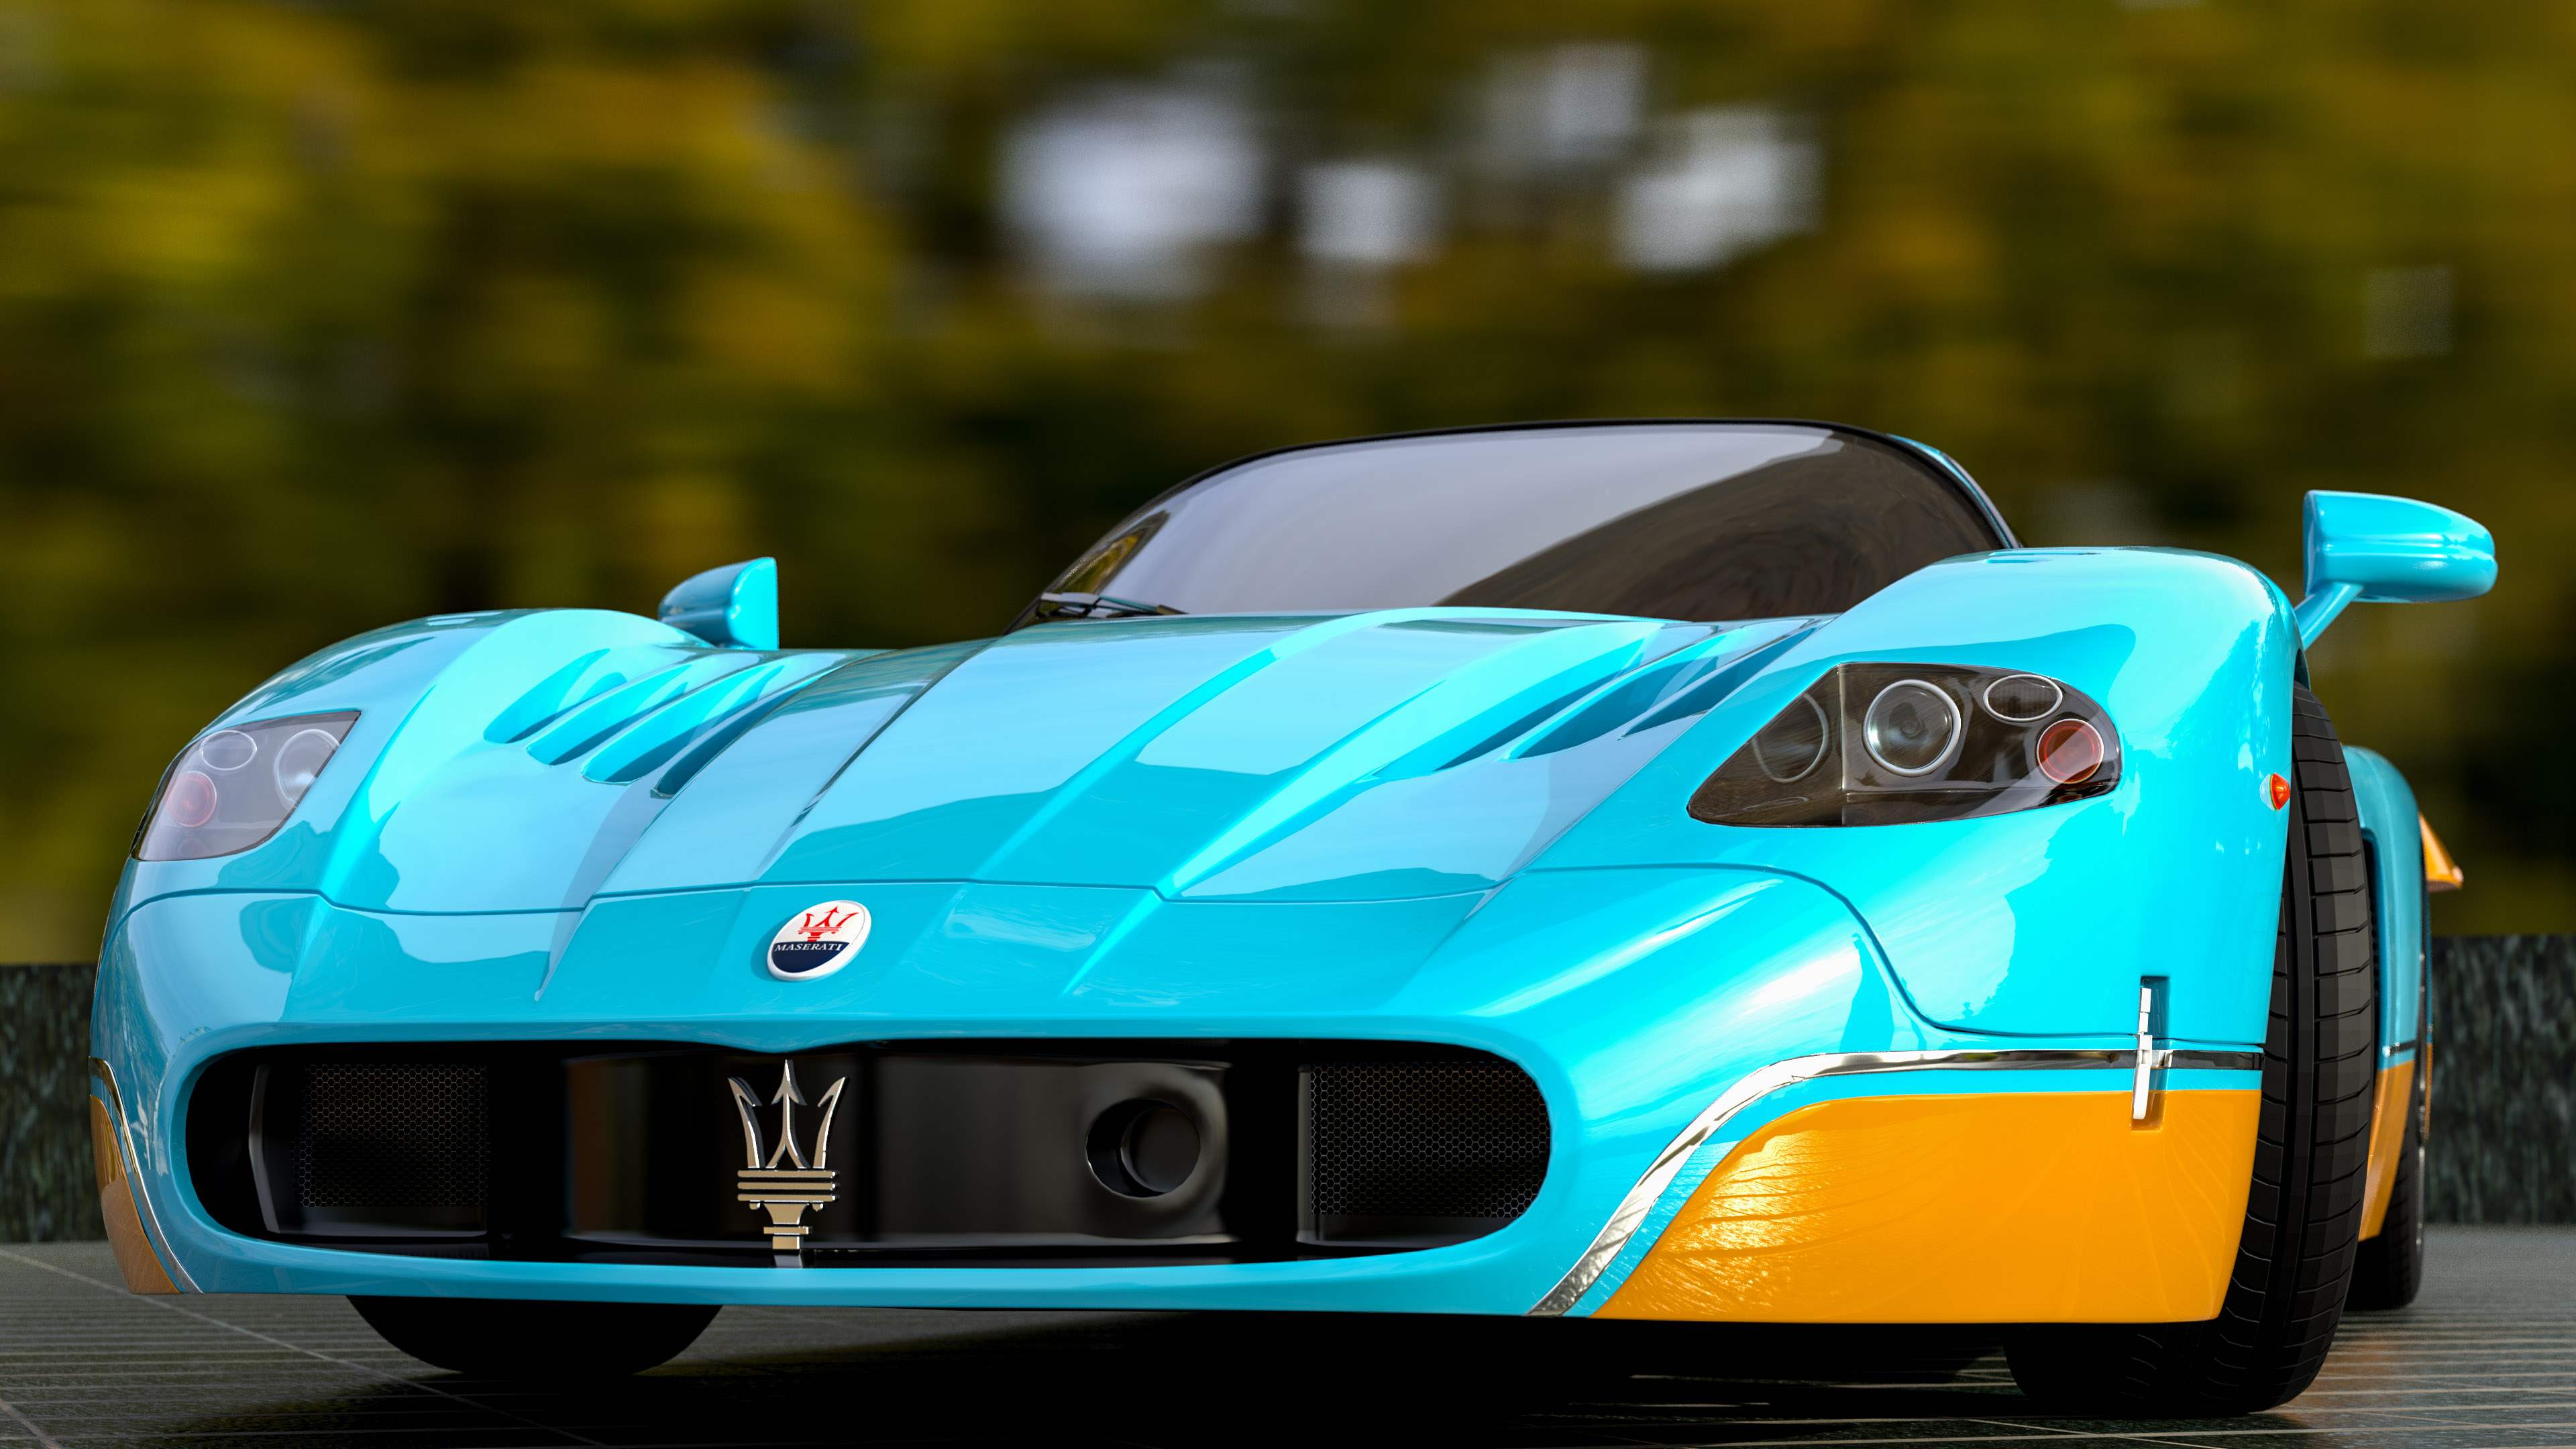 Discover the charm of the classic Maserati MC12 with our free car wallpaper, designed to bring its timeless elegance to your device.